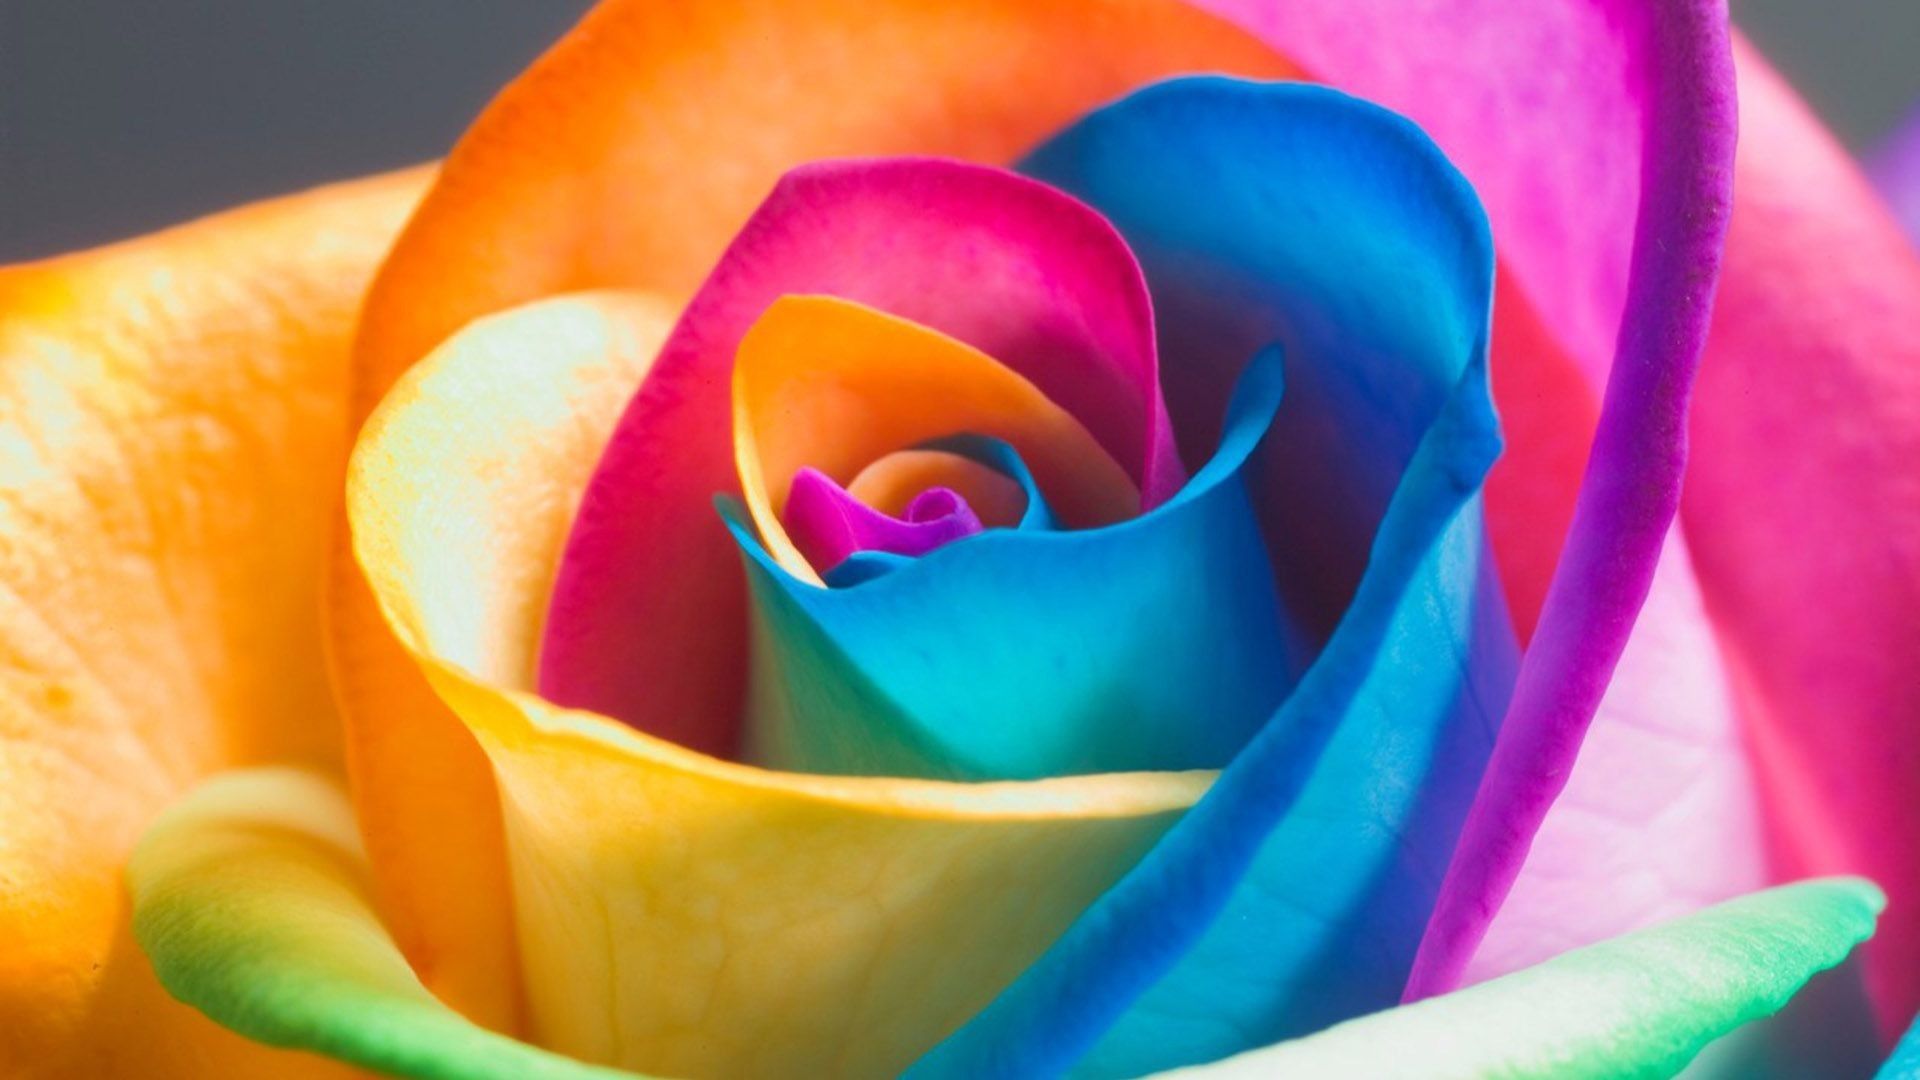 Rainbow Roses Wallpapers 4k Hd Rainbow Roses Backgrounds On Wallpaperbat